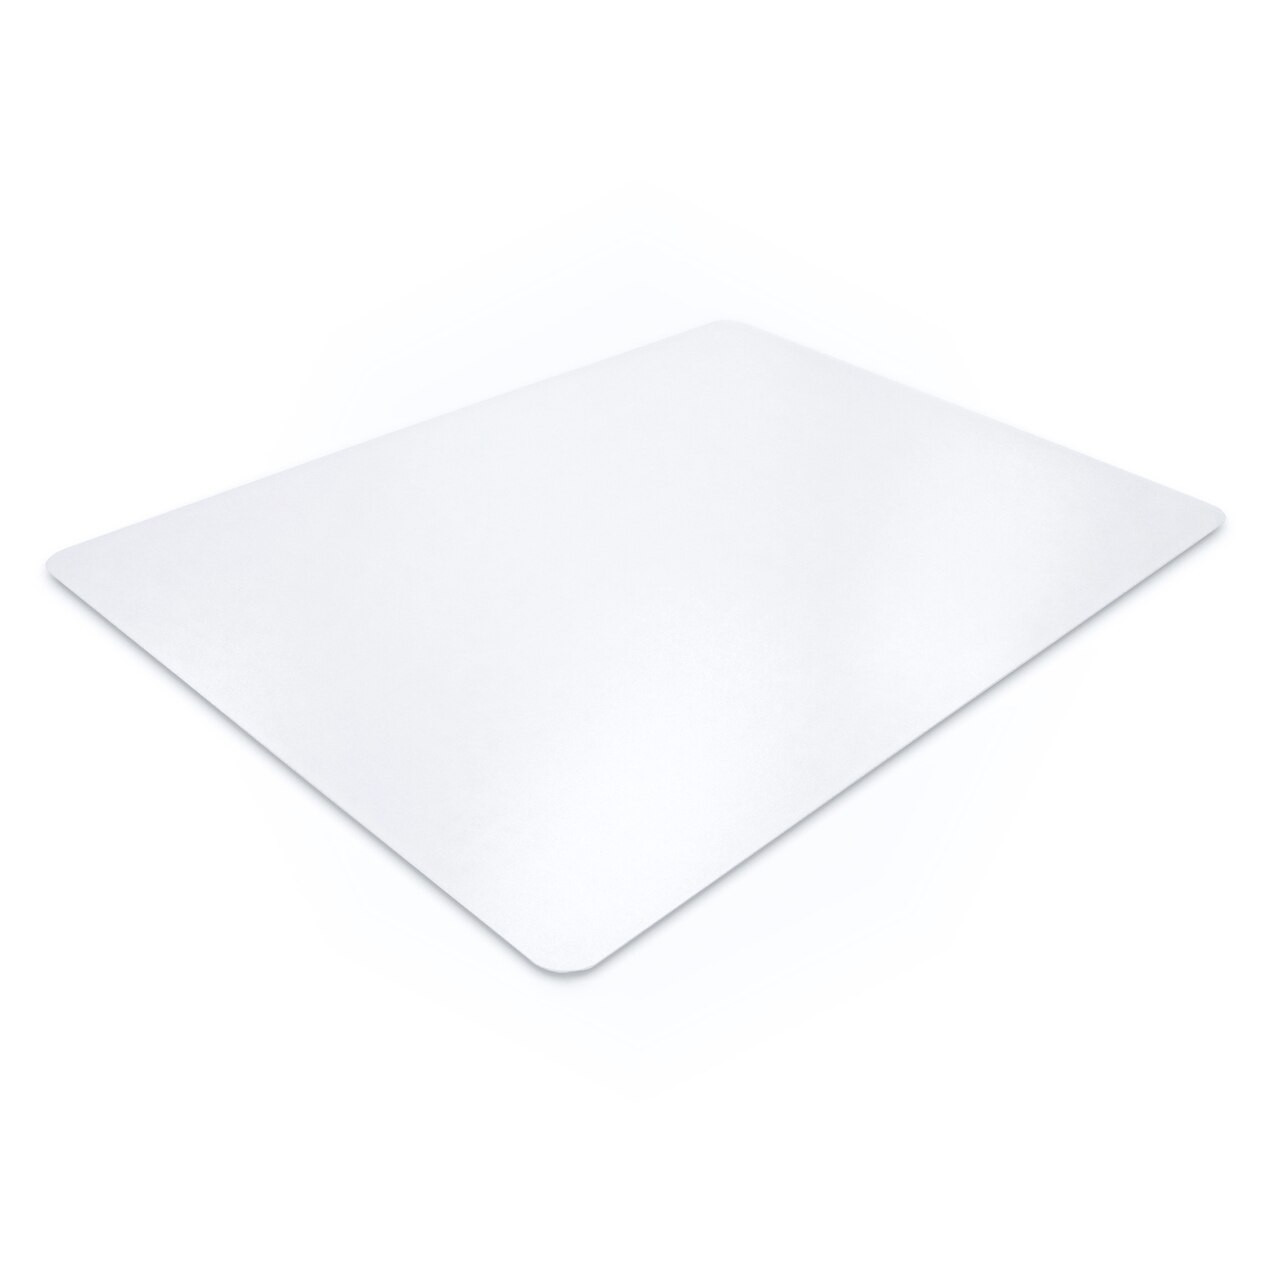 CraftTex Craft Table Protector Mat | Clear Polycarbonate | Rectangular |  Multiple Sizes